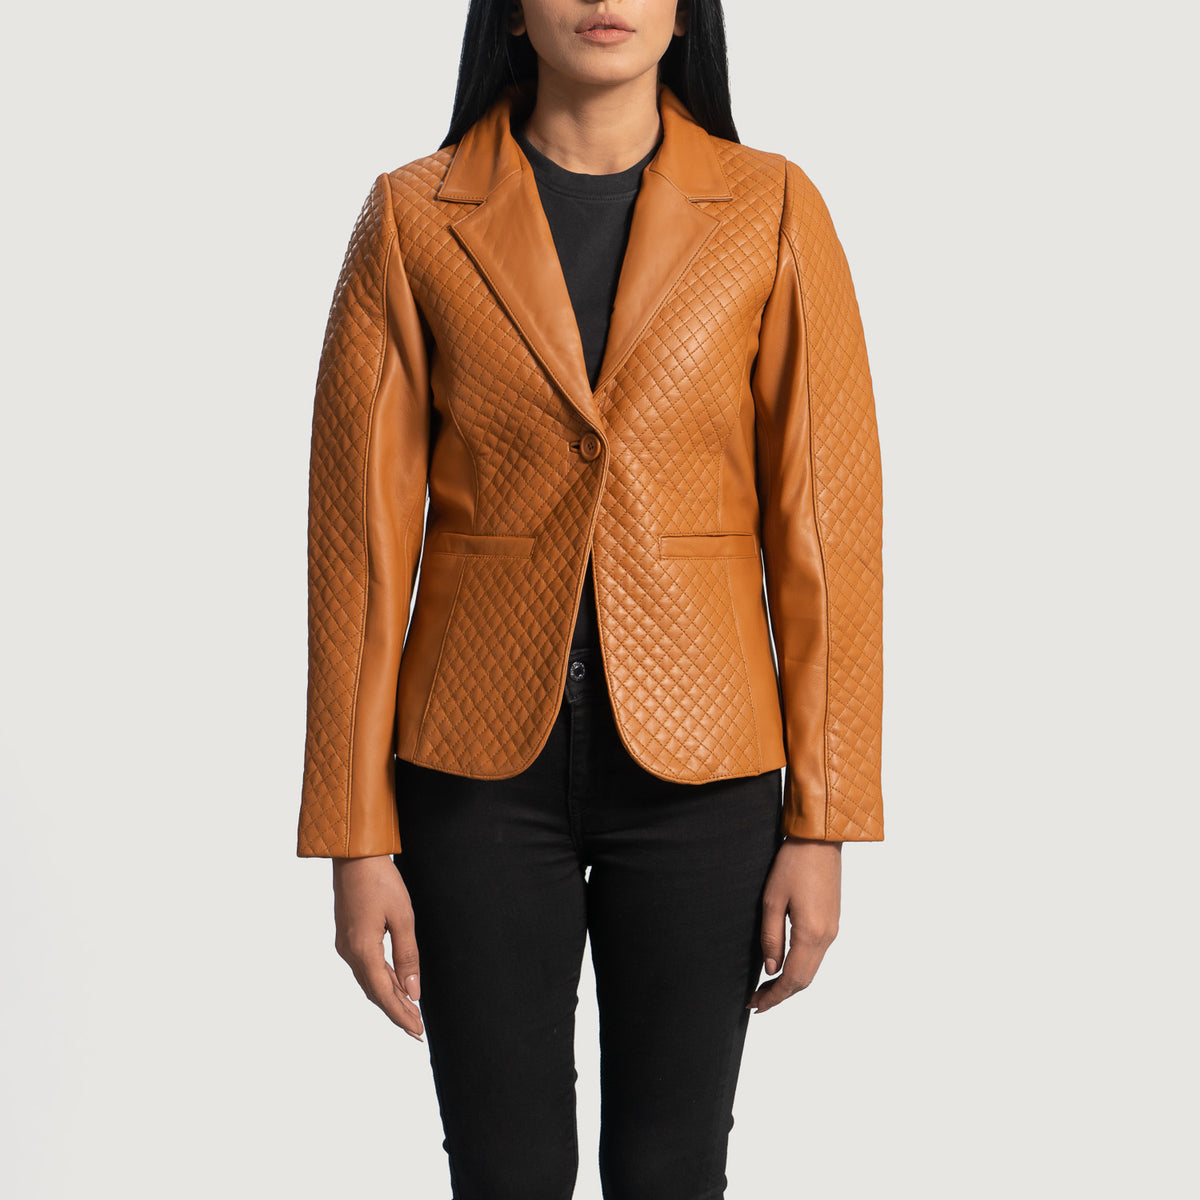 Ace Quilted Brown Leather Blazer Plus Size